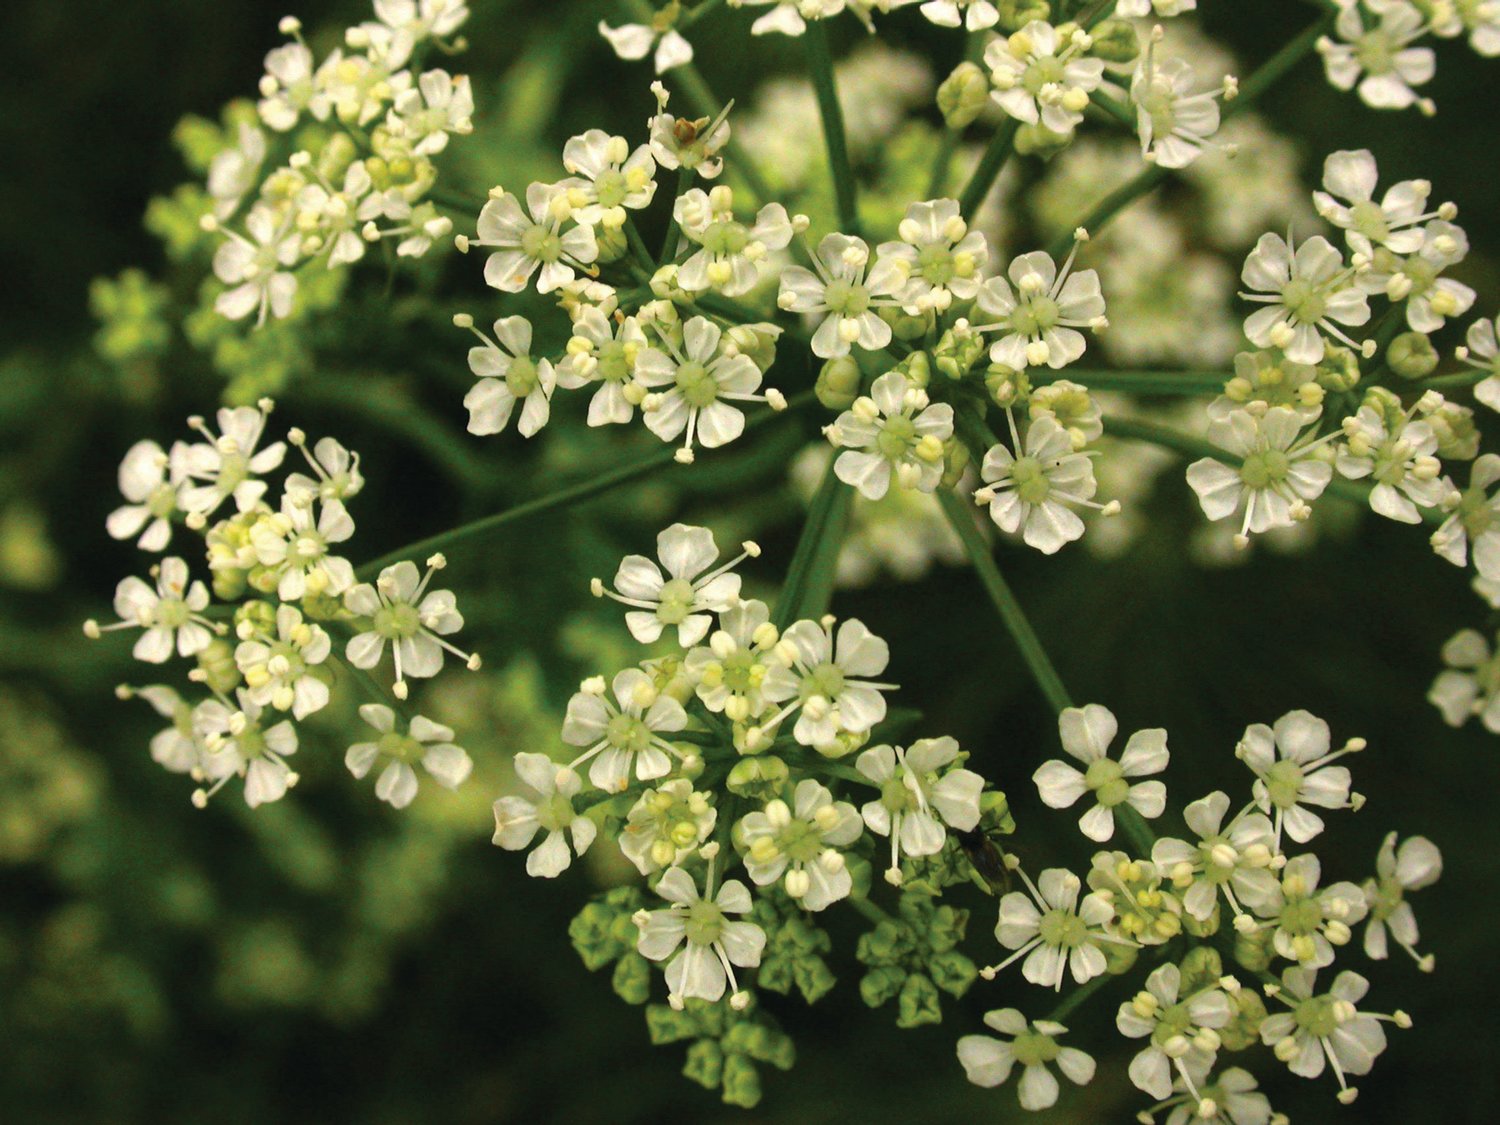 Poison hemlock has five-part flowers characteristic of the carrot family. The county’s Noxious Weed Board offers fact sheets to assist in identification of this toxic plant.